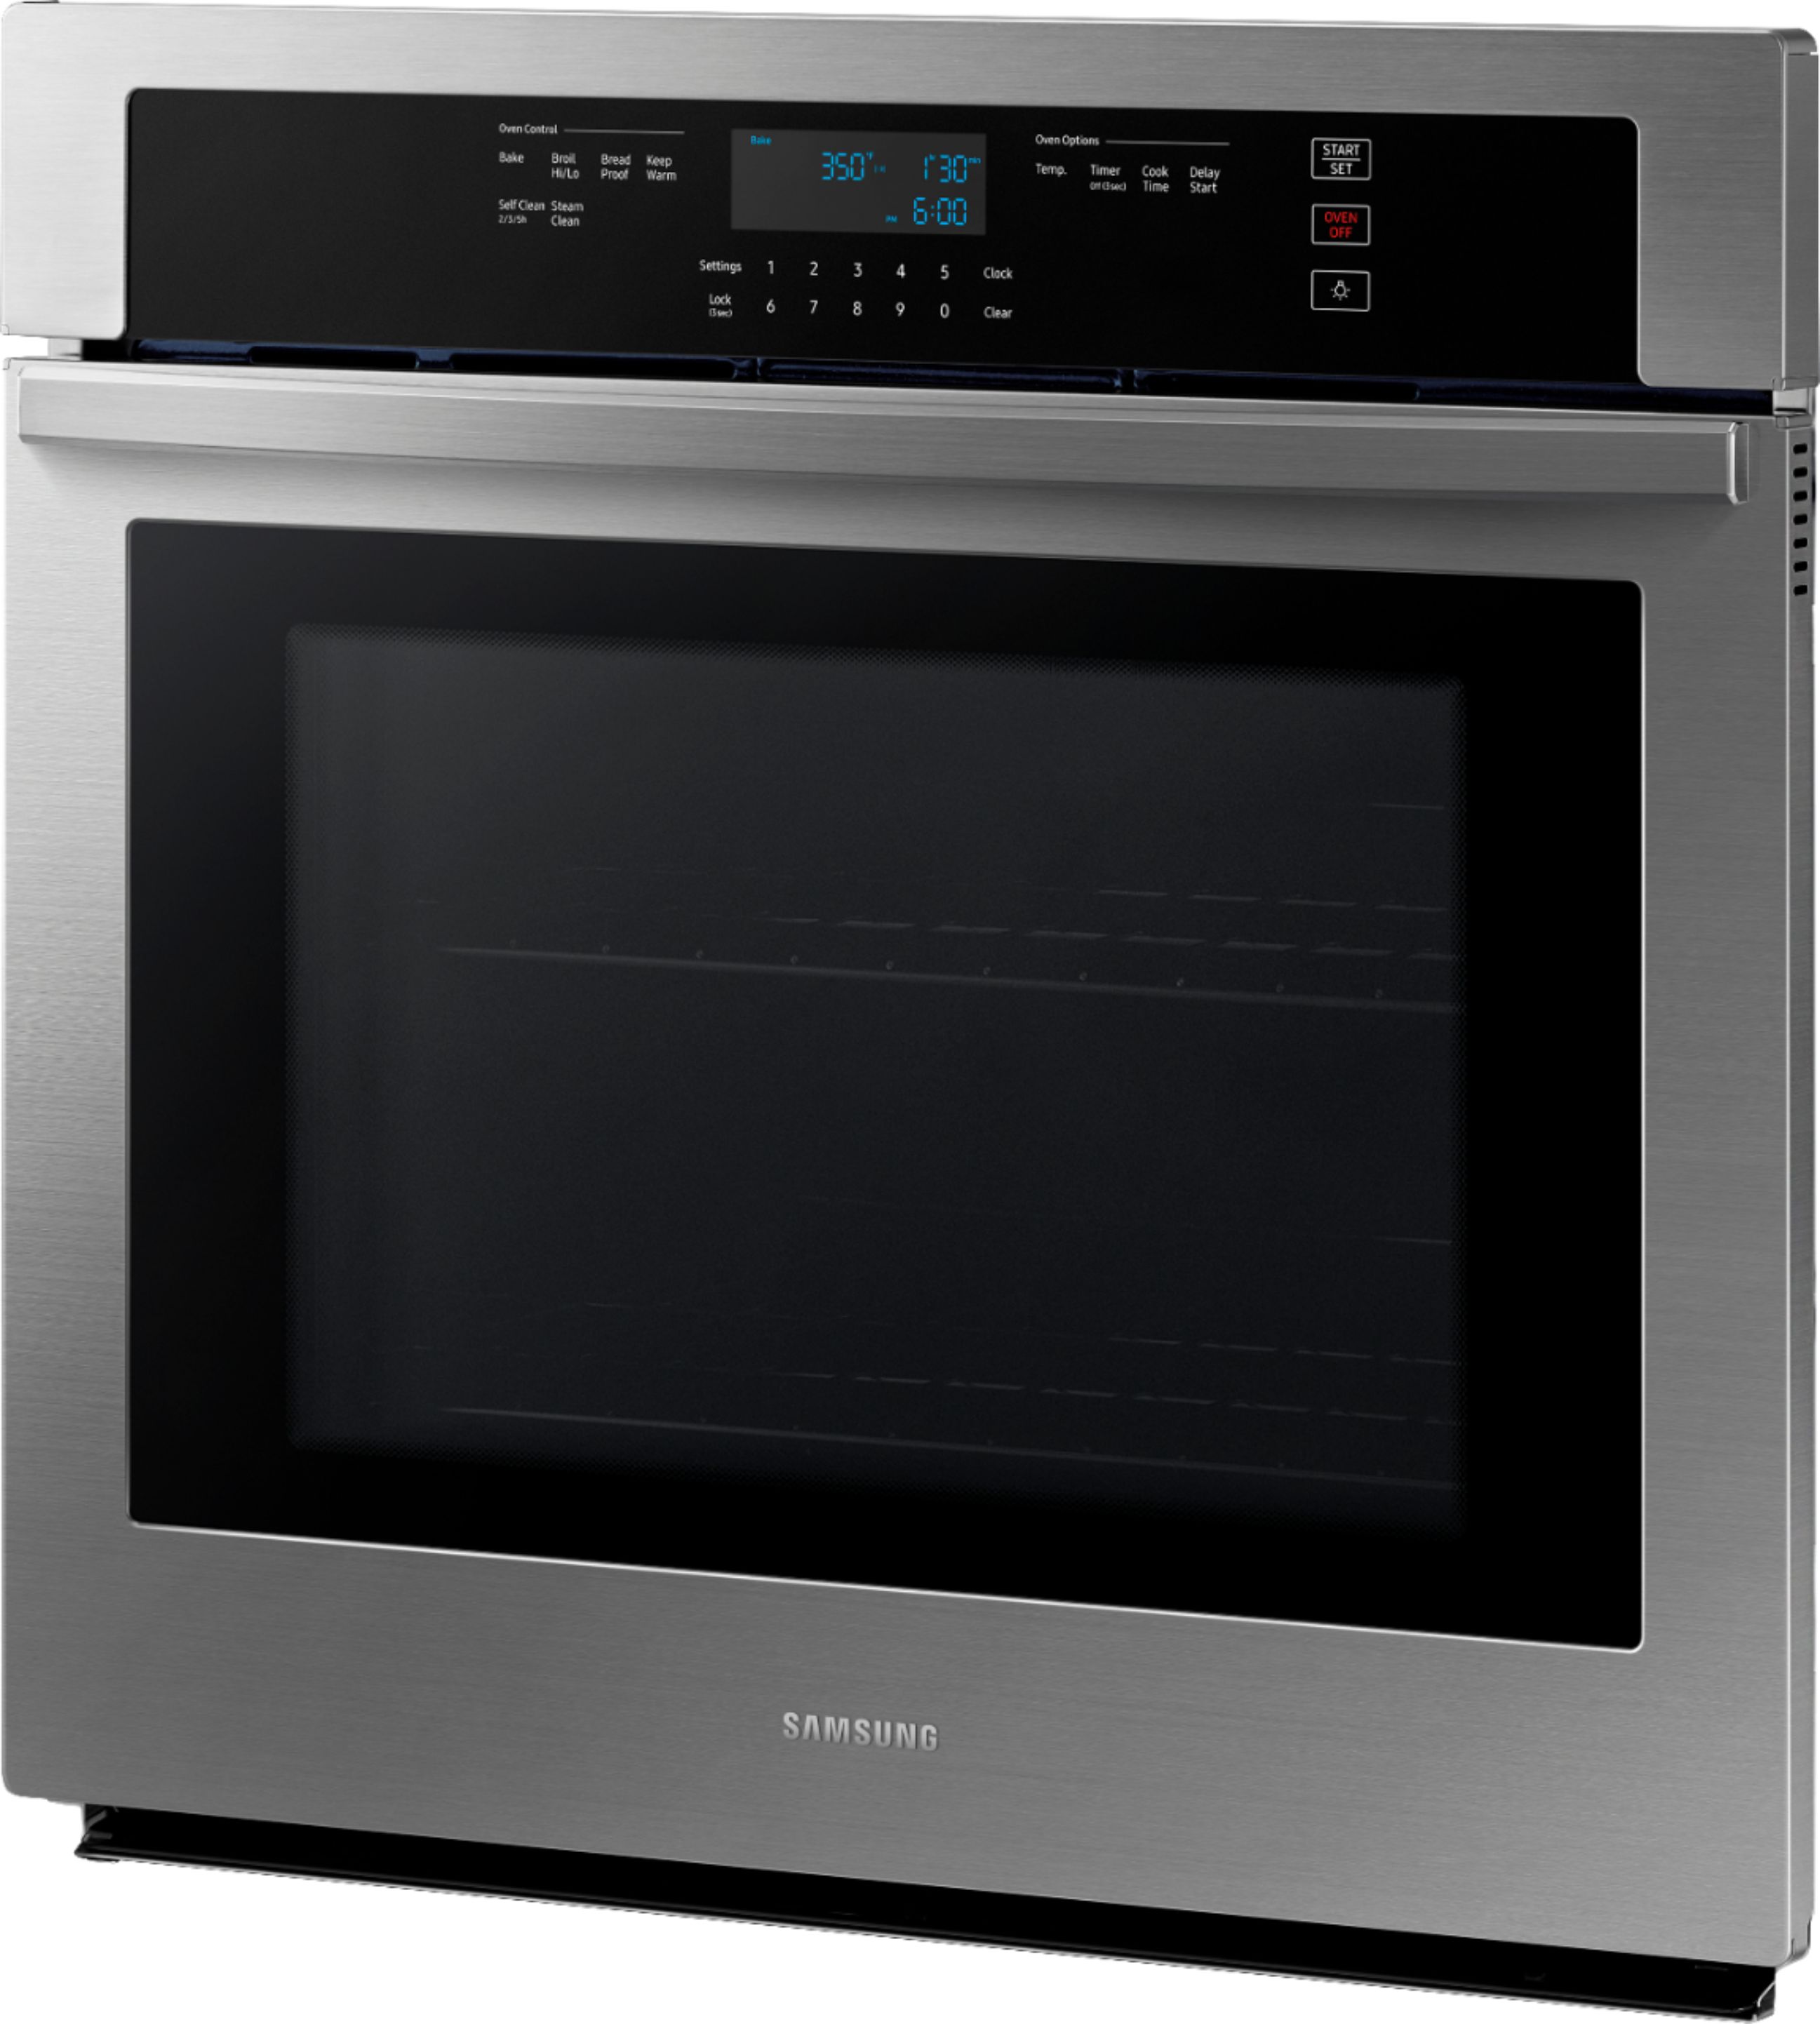 Samsung 30 Single Wall Oven Black Stainless Steel